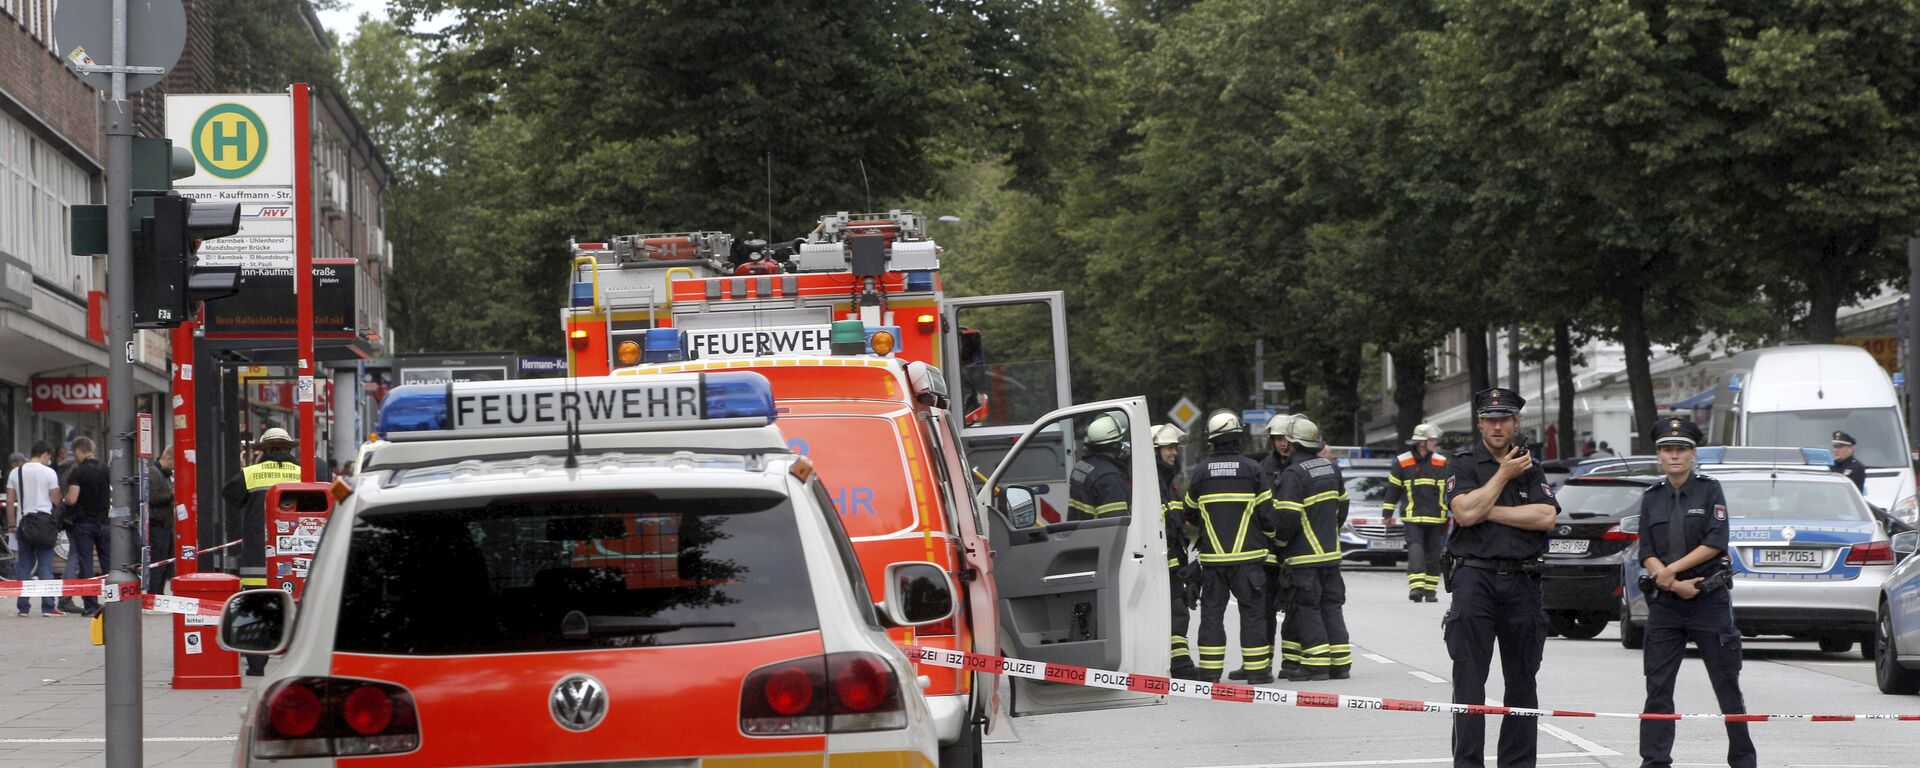 Police officers and fire engines stand in front of the supermarket in Hamburg, Germany, Friday, July 28, 2017, where a man with a knife fatally stabbed one person and wounded four others as he fled, police said - Sputnik International, 1920, 09.04.2023